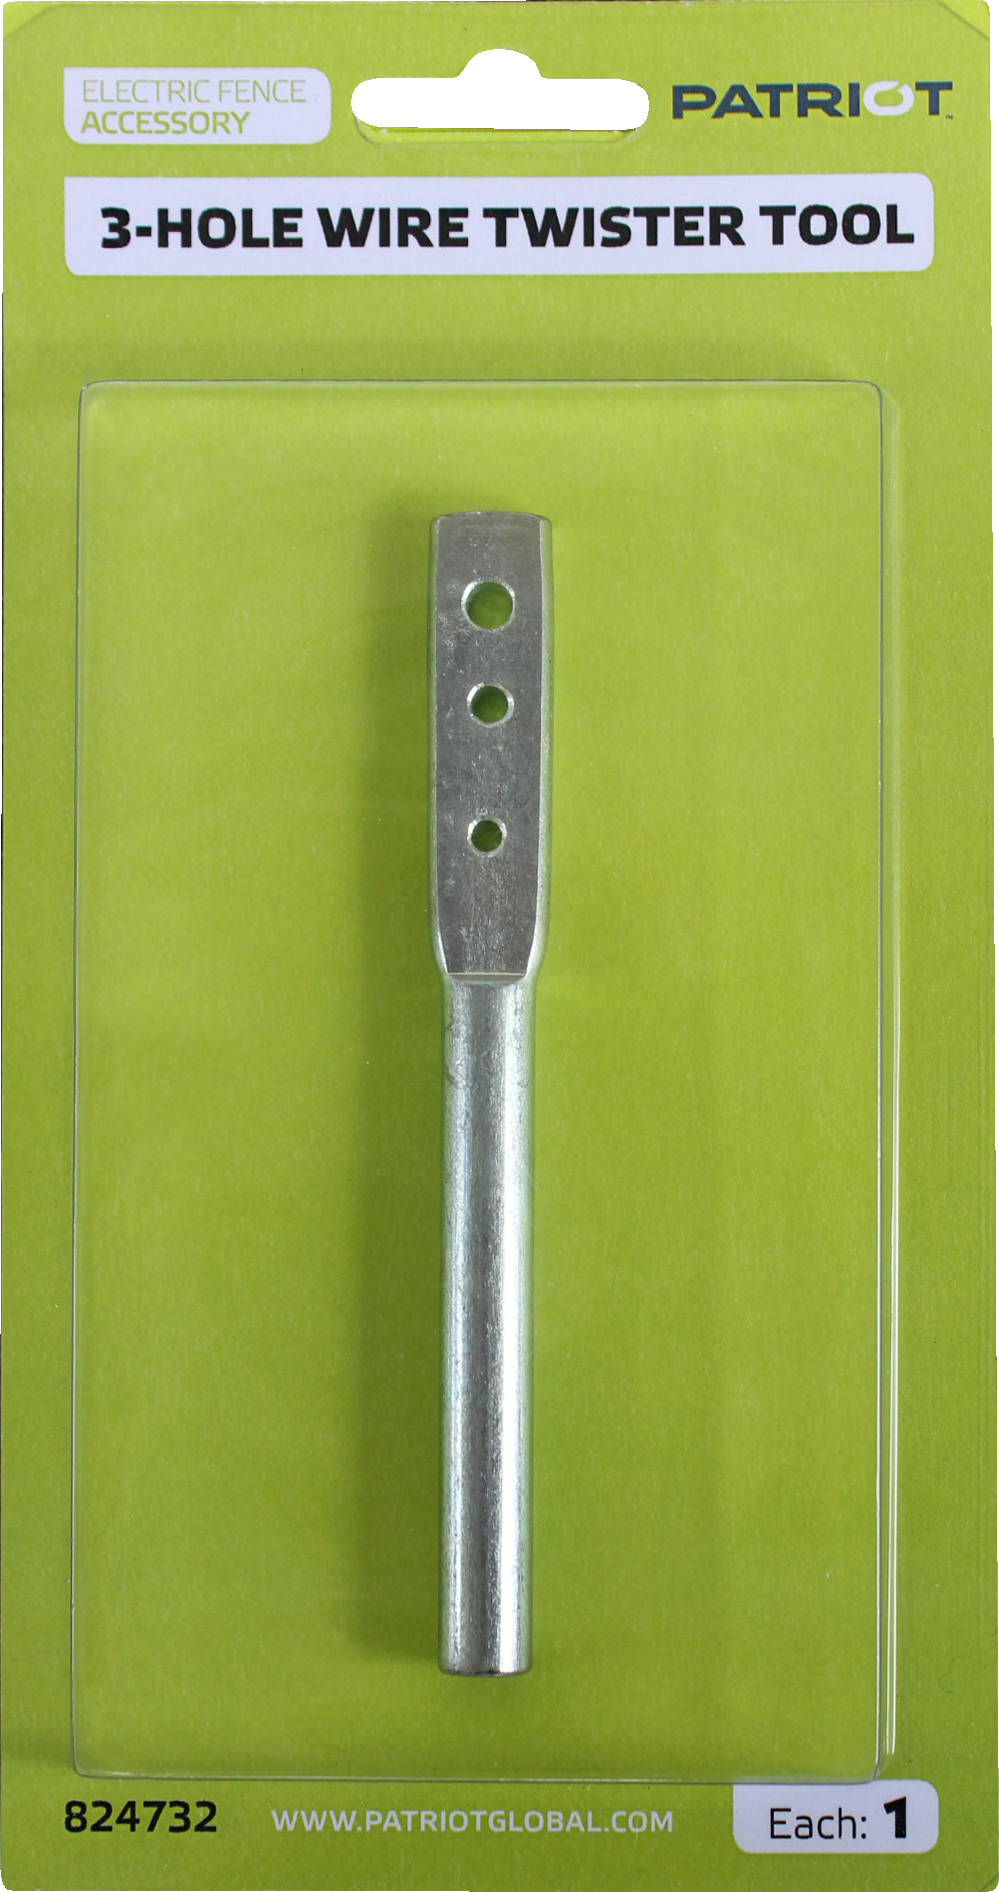 PATRIOT™ 3 Hole Wire Twister Tool